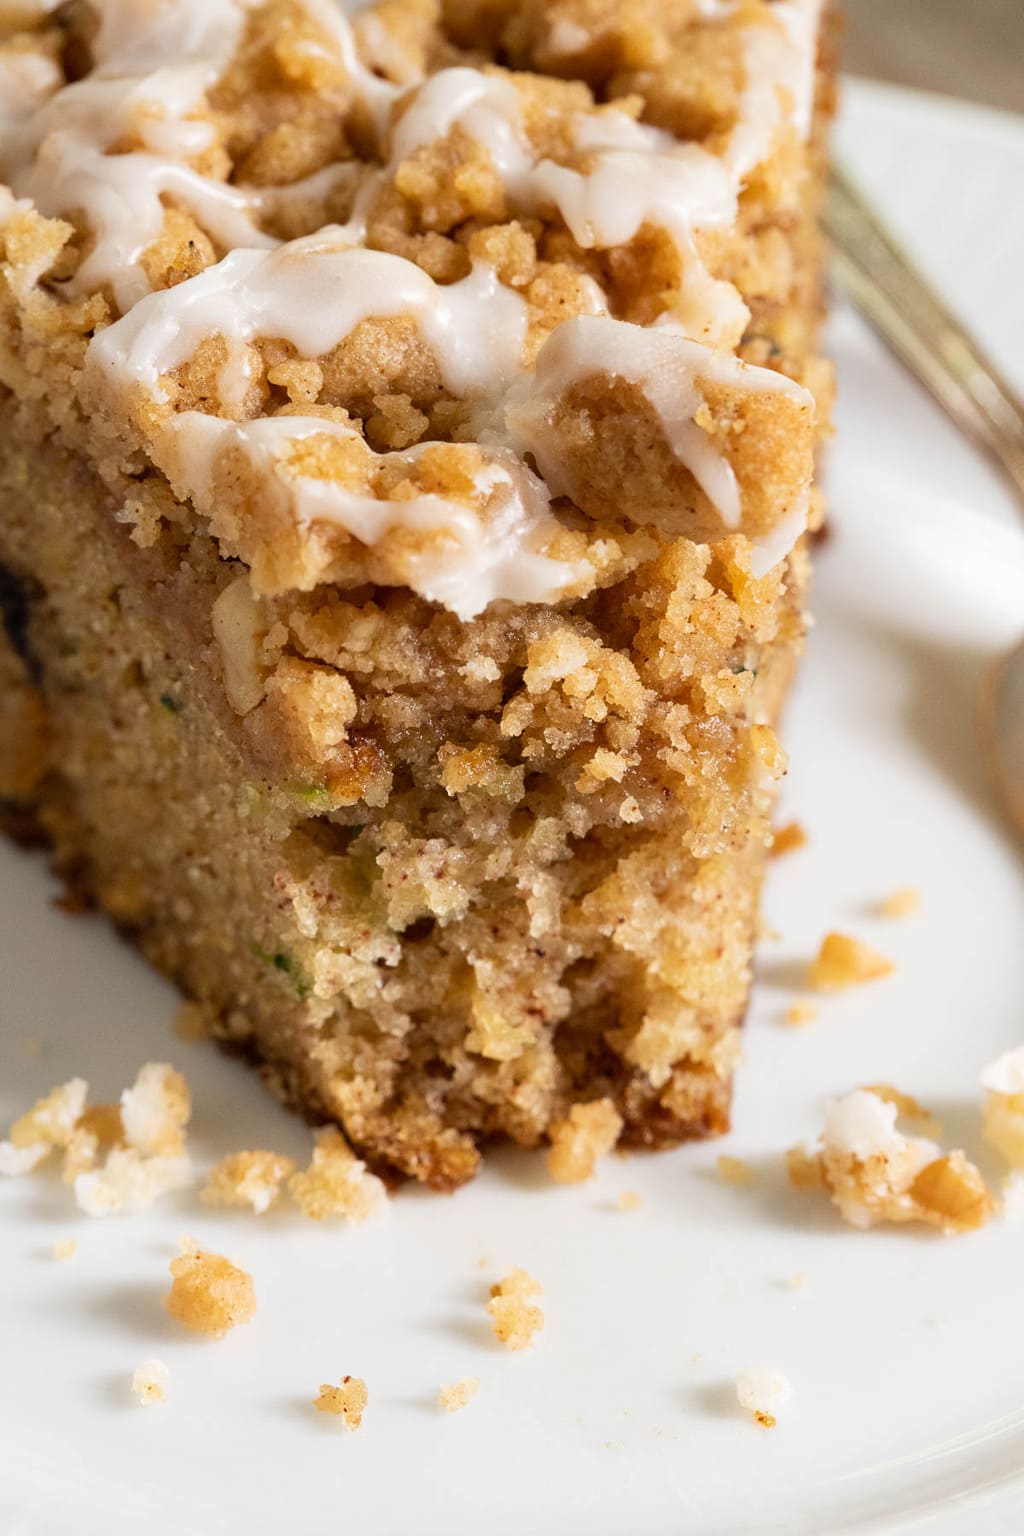 Extreme closeup vertical photo of the wedge front of a slice of Easy Zucchini Crumb Cake on a white serving plate.